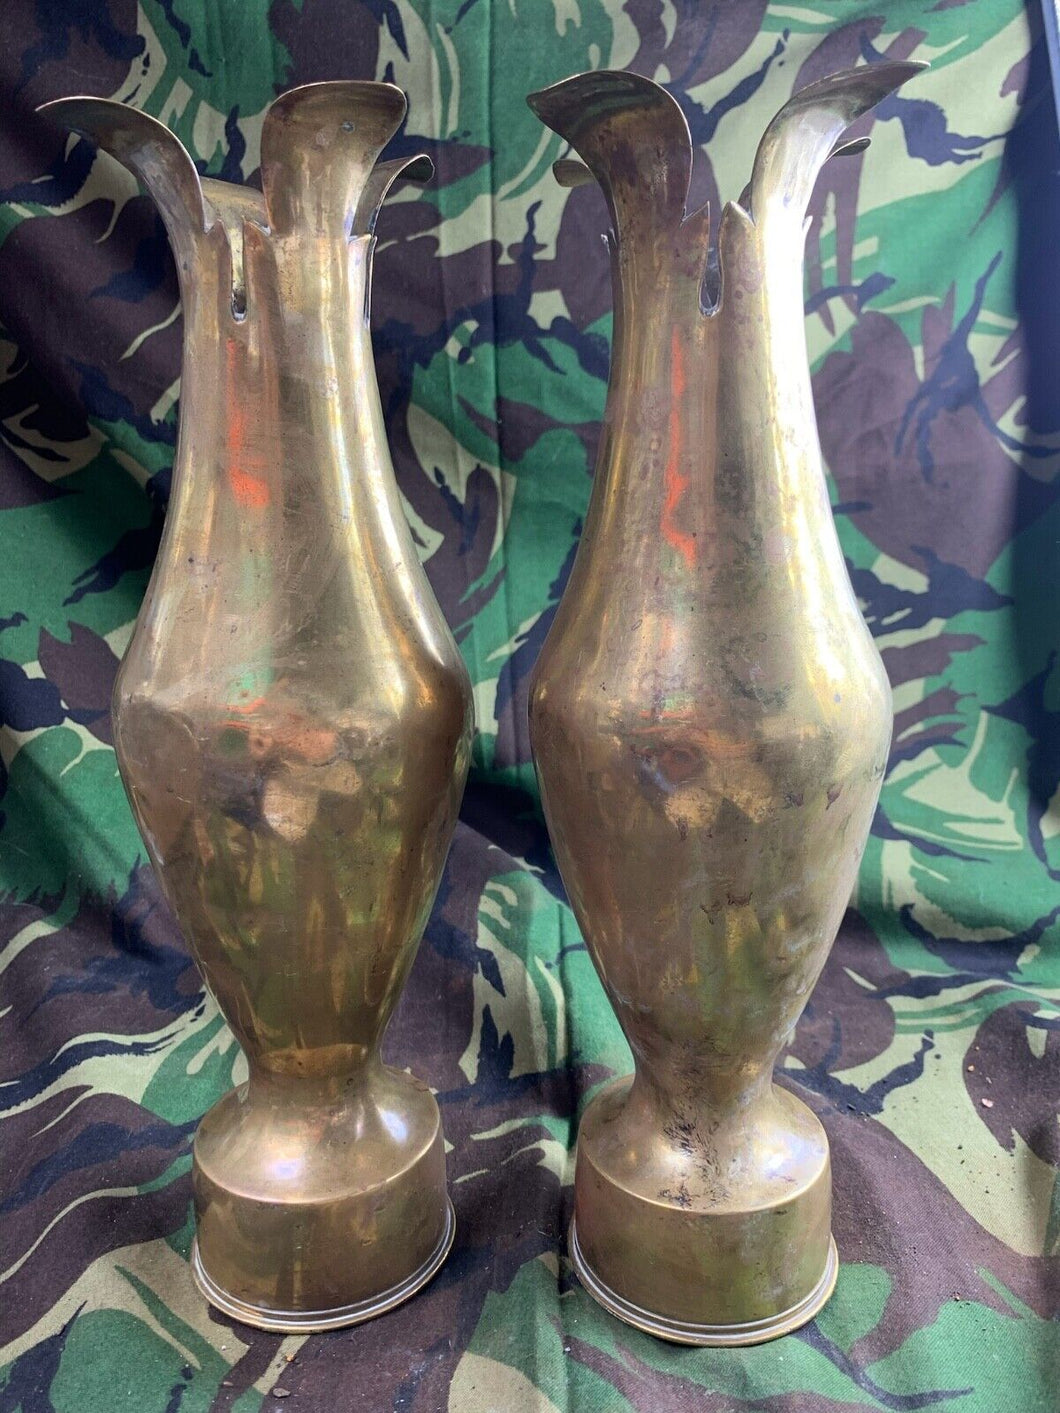 Fantastic Fluted WW1 Trench Art Vase Pair